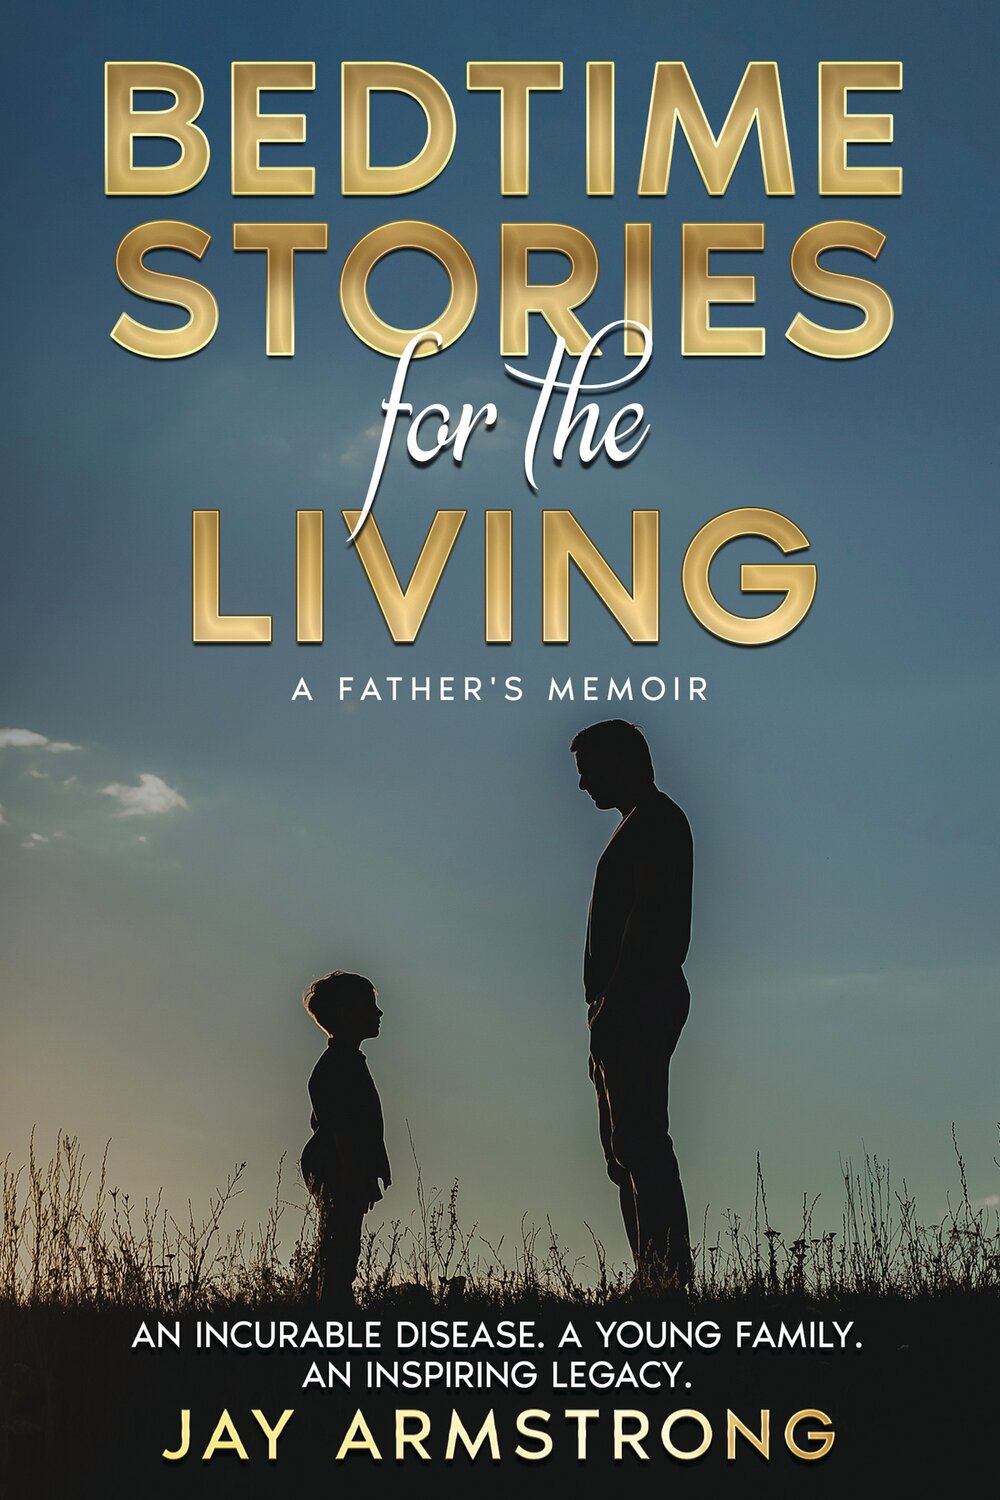 Jay Armstrong’s first book is “Bedtime Stories for the Living: A Father’s Memoir.” In it, the Bensalem author recounts his battle with cerebellar atrophy.